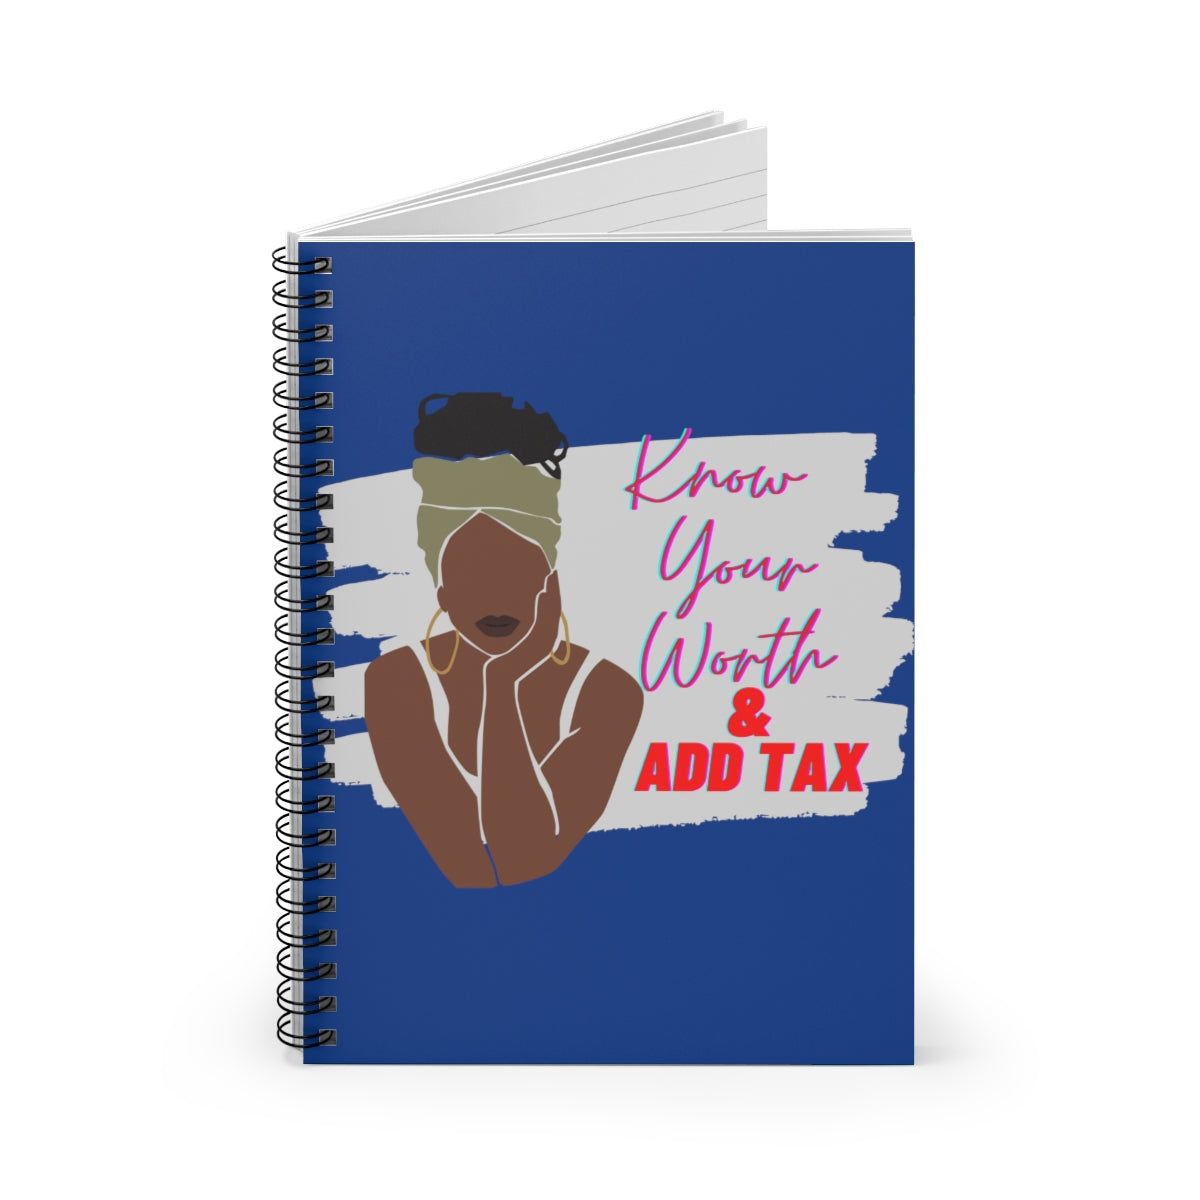 Know Your Worth & Add Tax Blue Spiral Notebook - Ruled Line